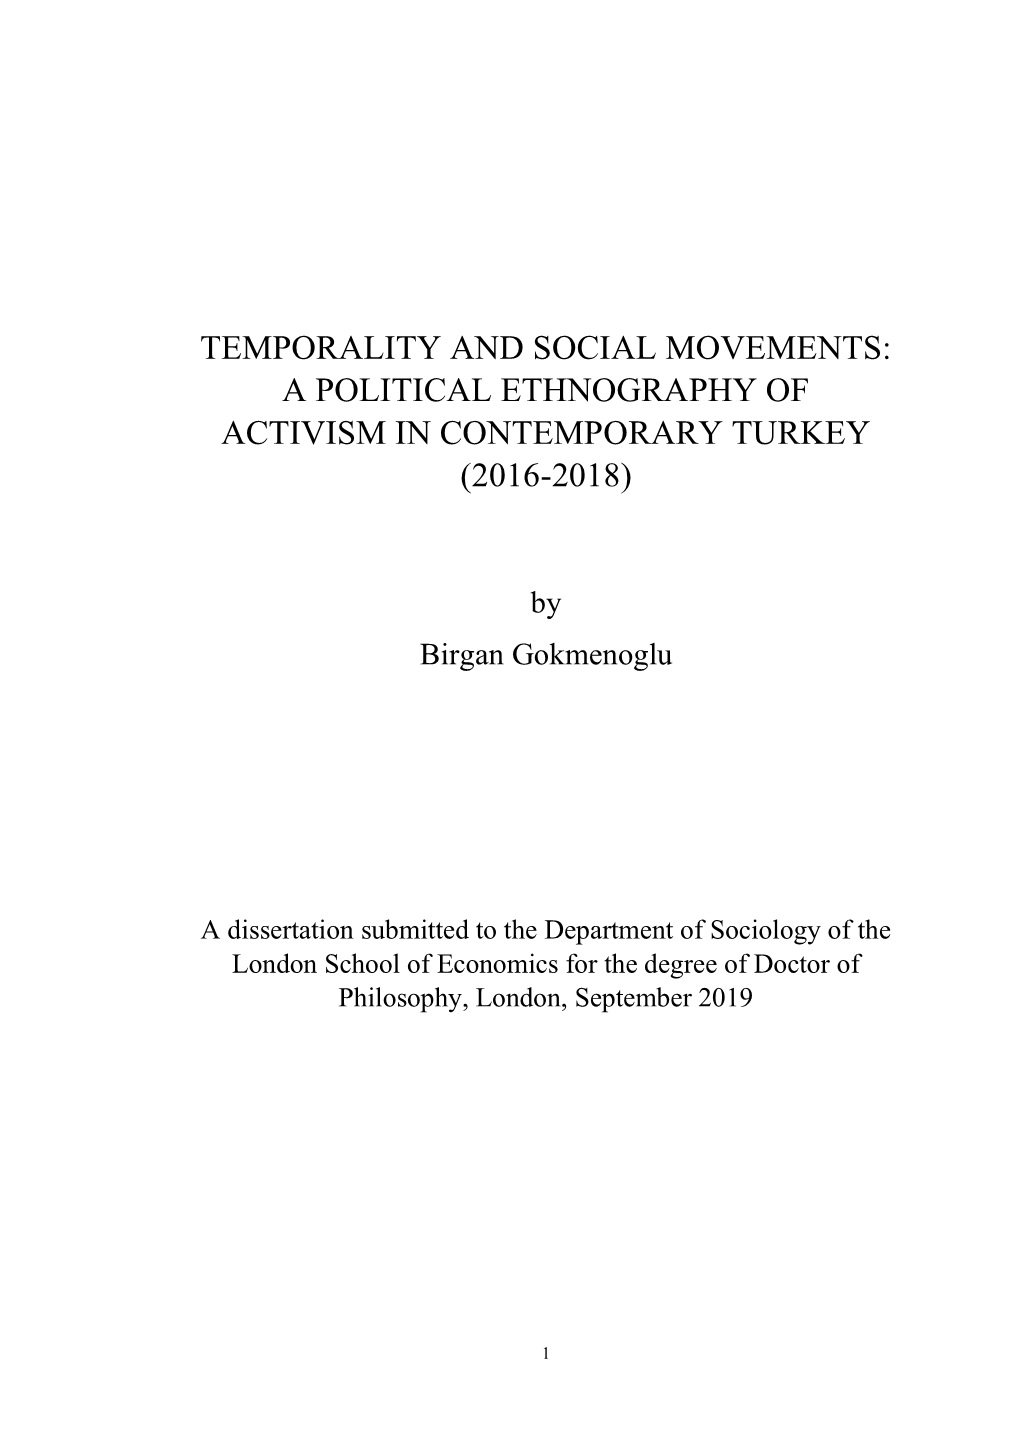 Temporality and Social Movements: a Political Ethnography of Activism in Contemporary Turkey (2016-2018)